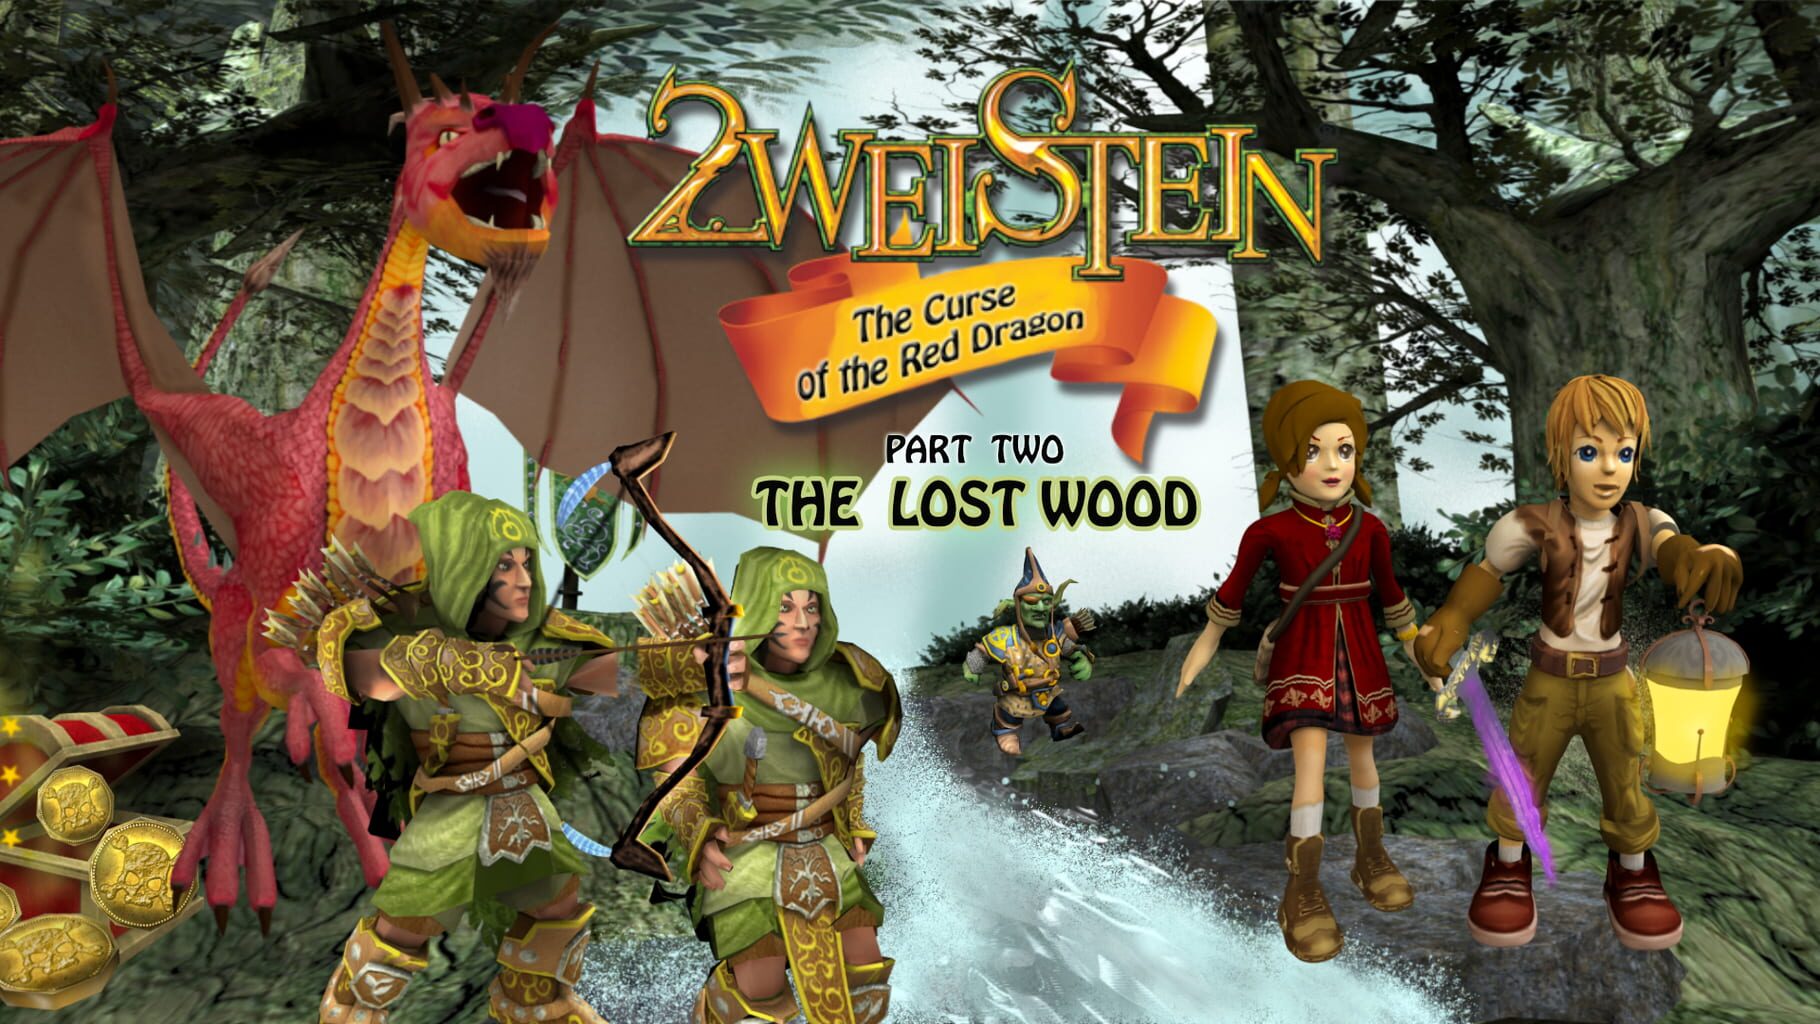 2weistein: The Curse of the Red Dragon 2 artwork